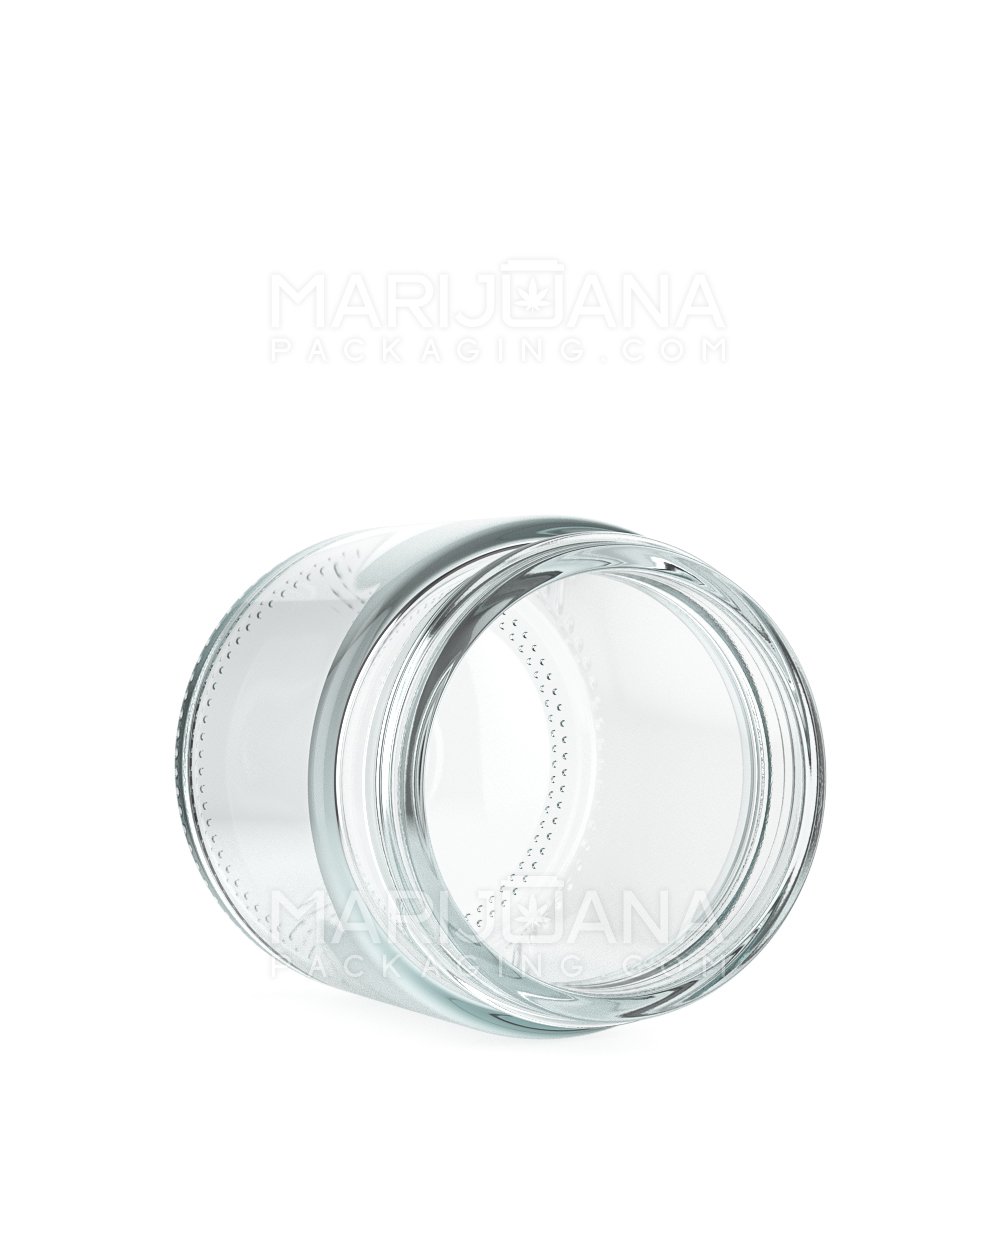 Straight Sided Clear Glass Jars | 50mm - 3oz - 100 Count - 3